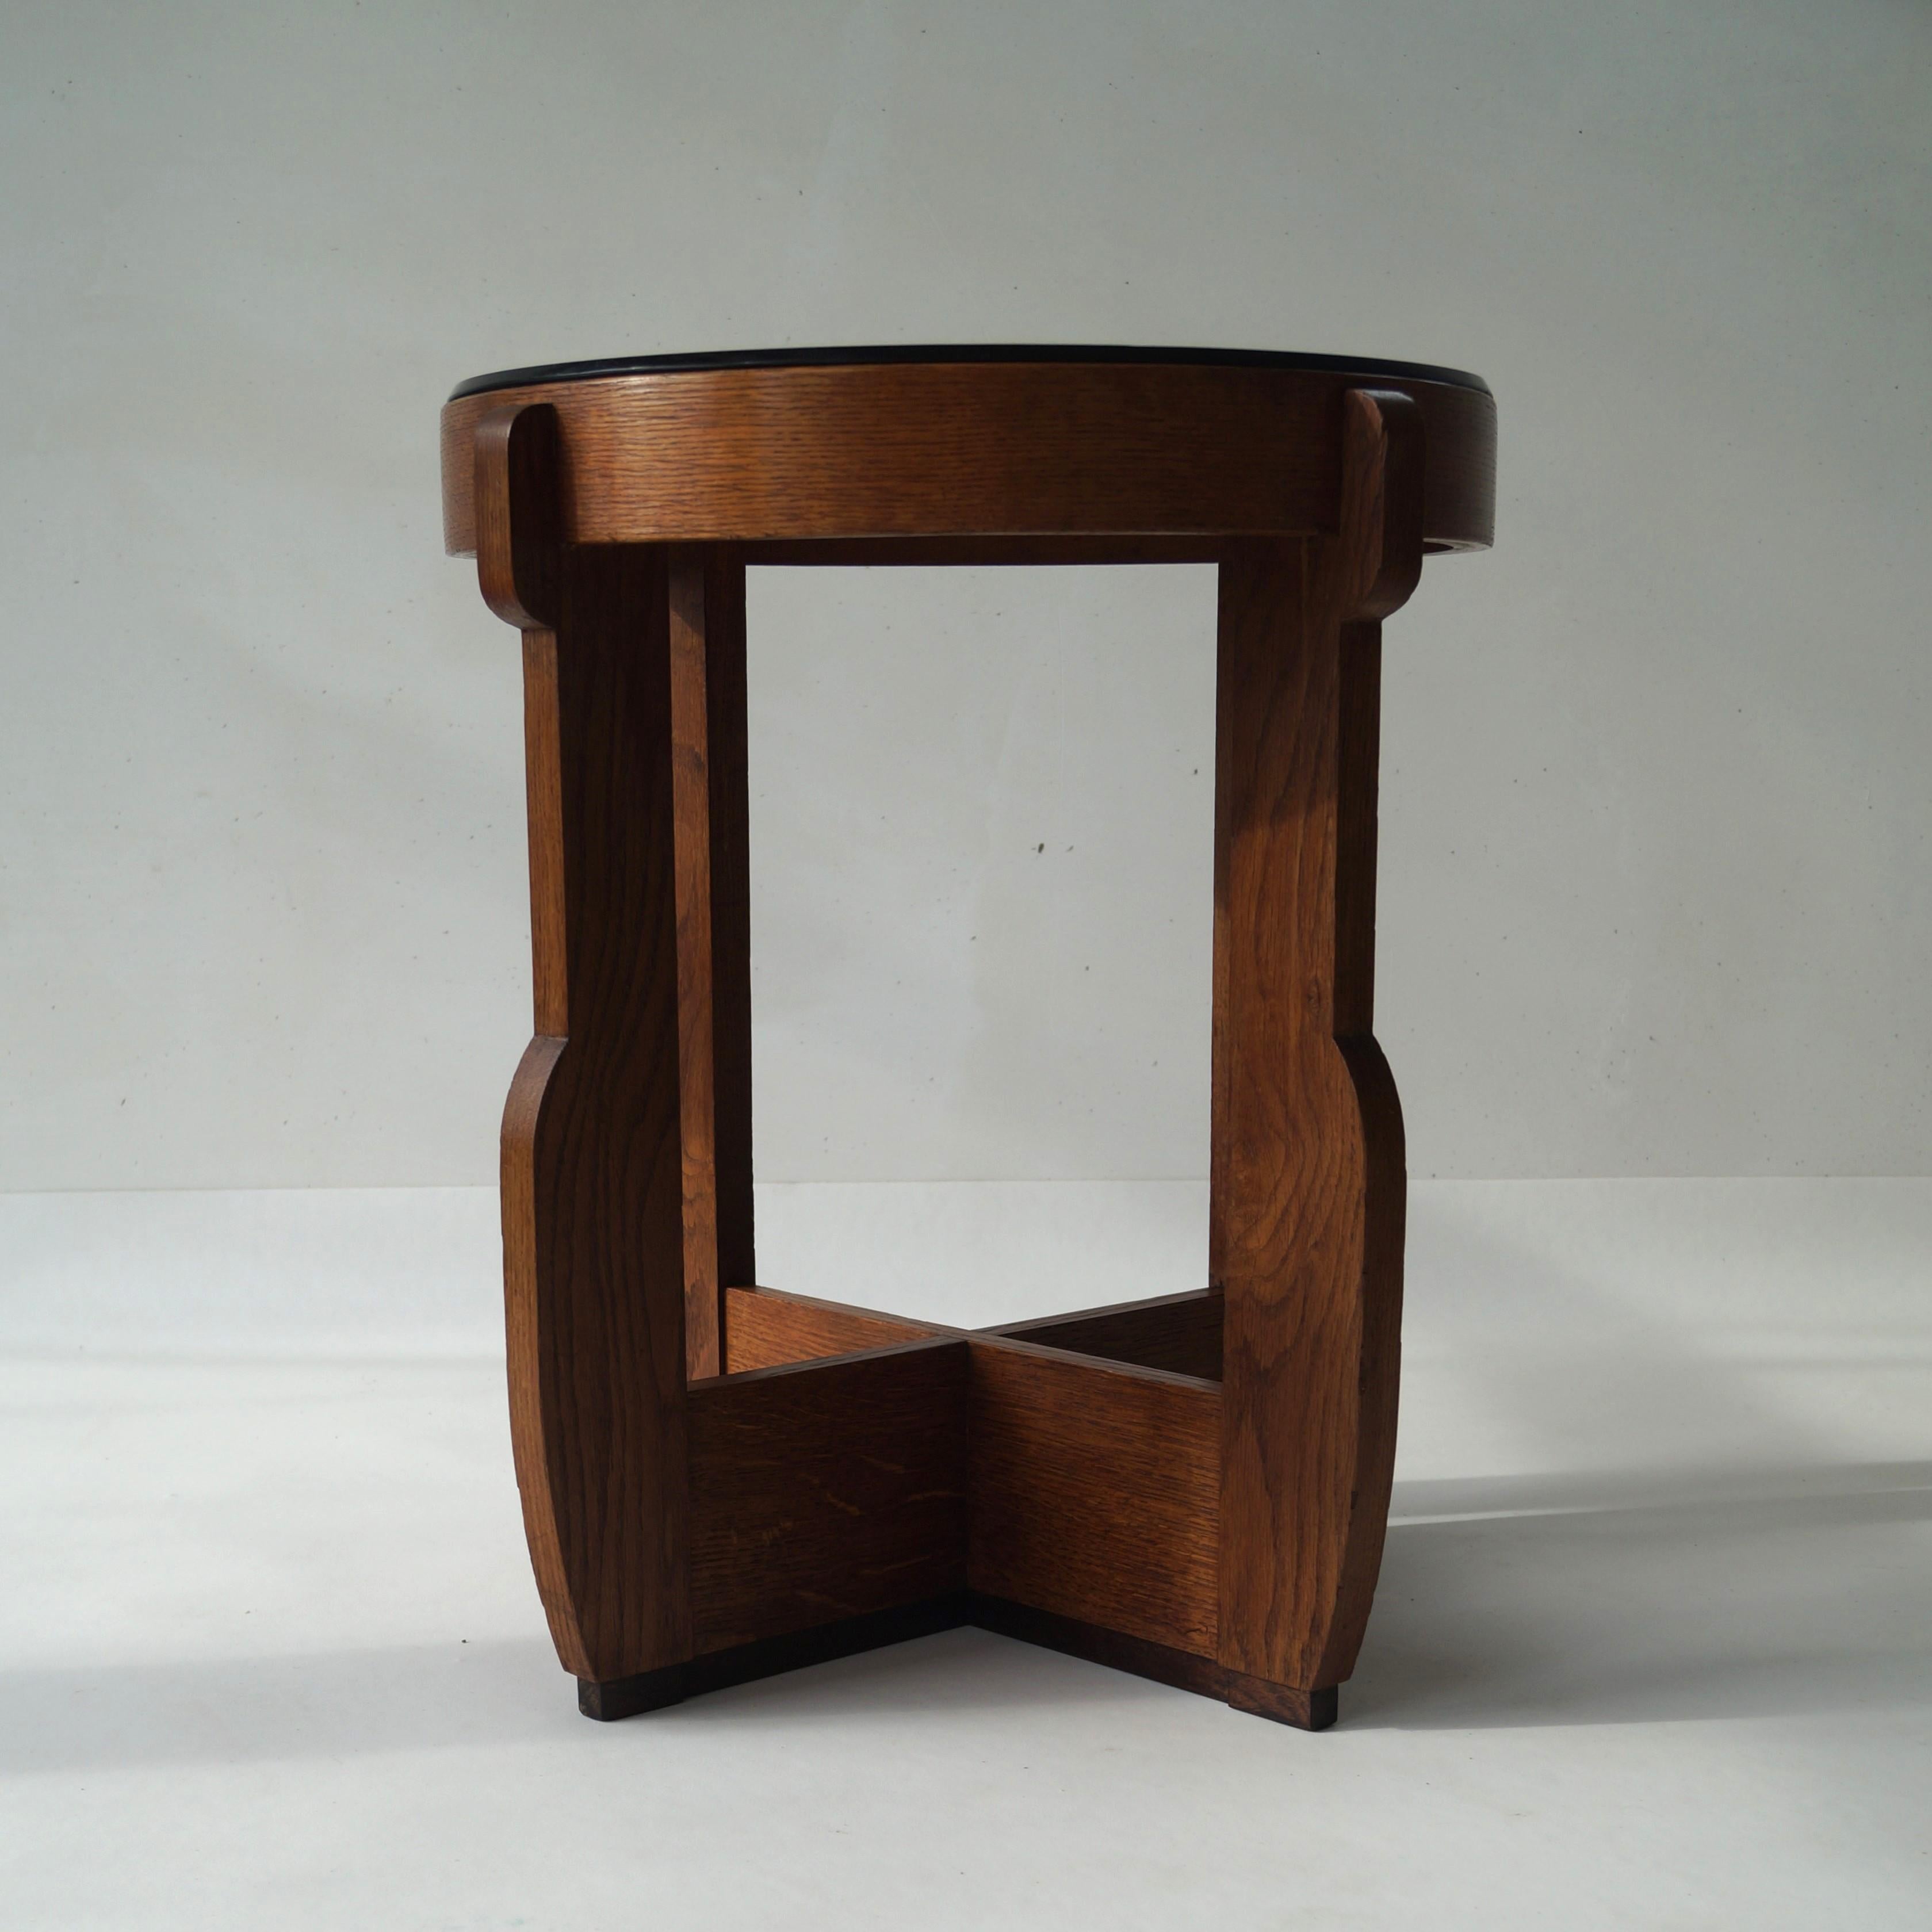 Faceted Dutch Art Deco Haagse School Occasional Table, 1930s